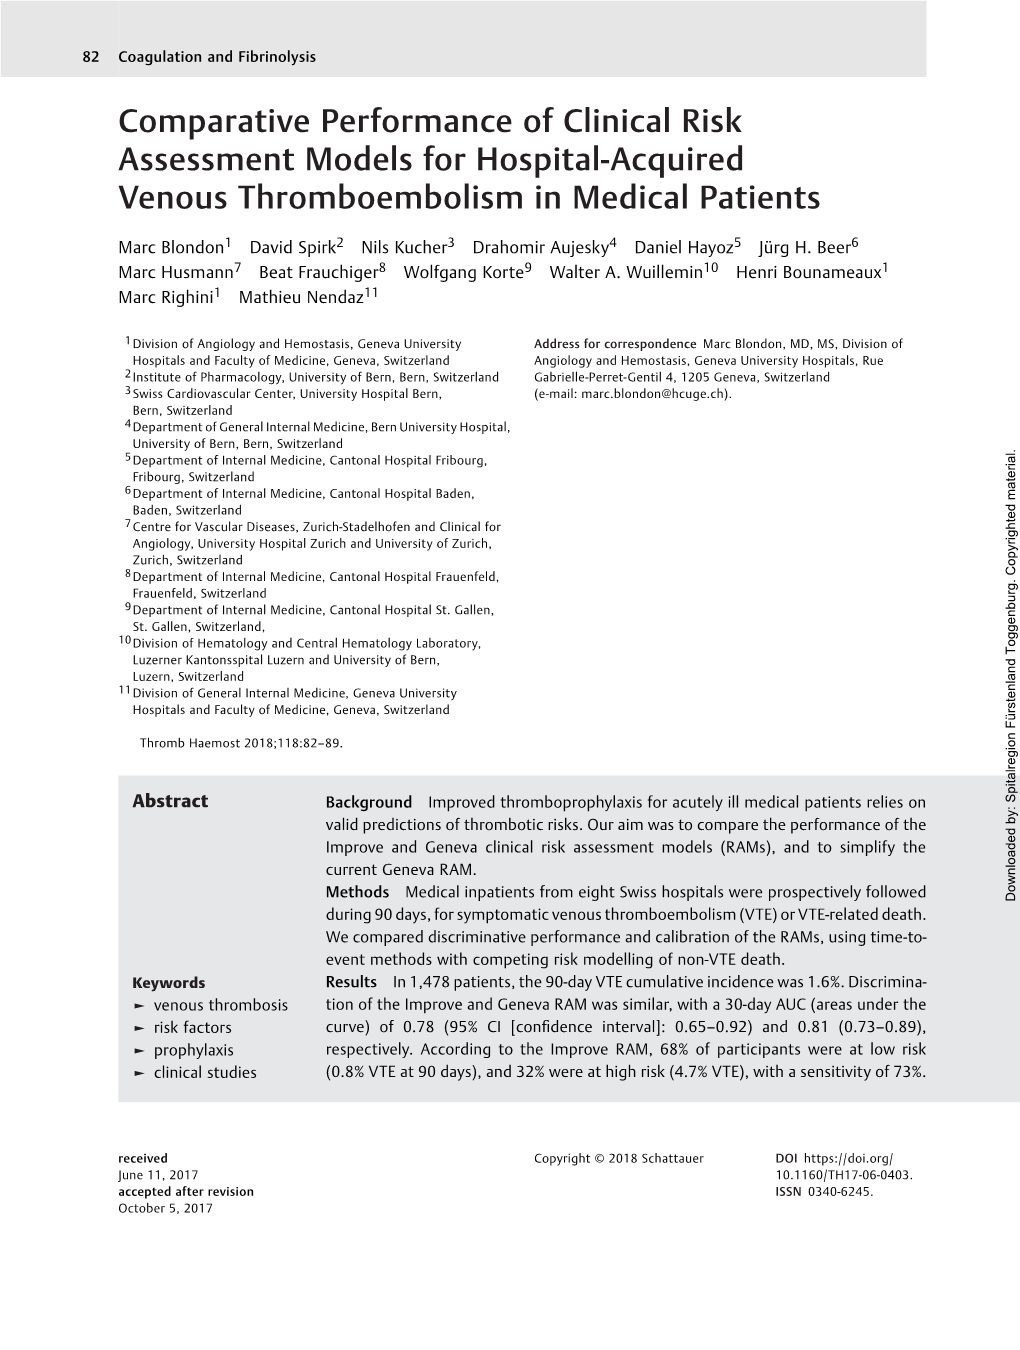 Comparative Performance of Clinical Risk Assessment Models for Hospital-Acquired Venous Thromboembolism in Medical Patients